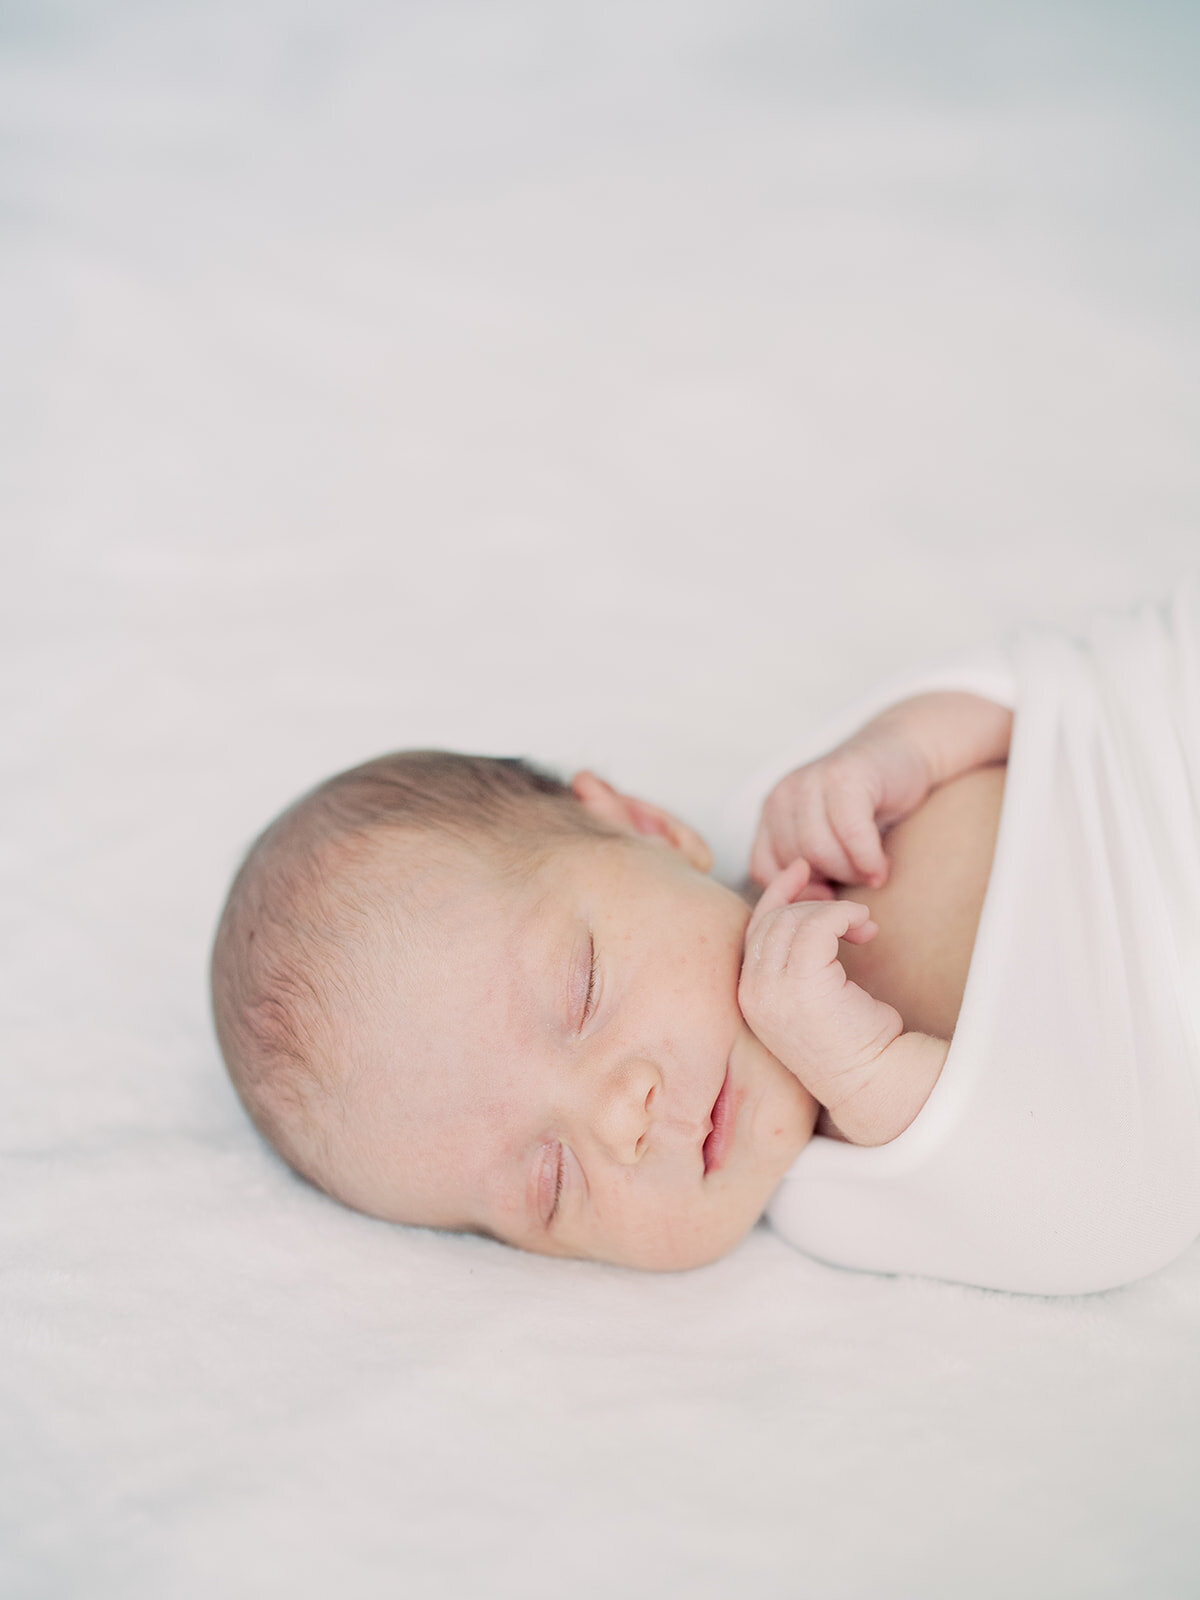 Newborn baby swaddled in white sleeps peacefully on a bed.